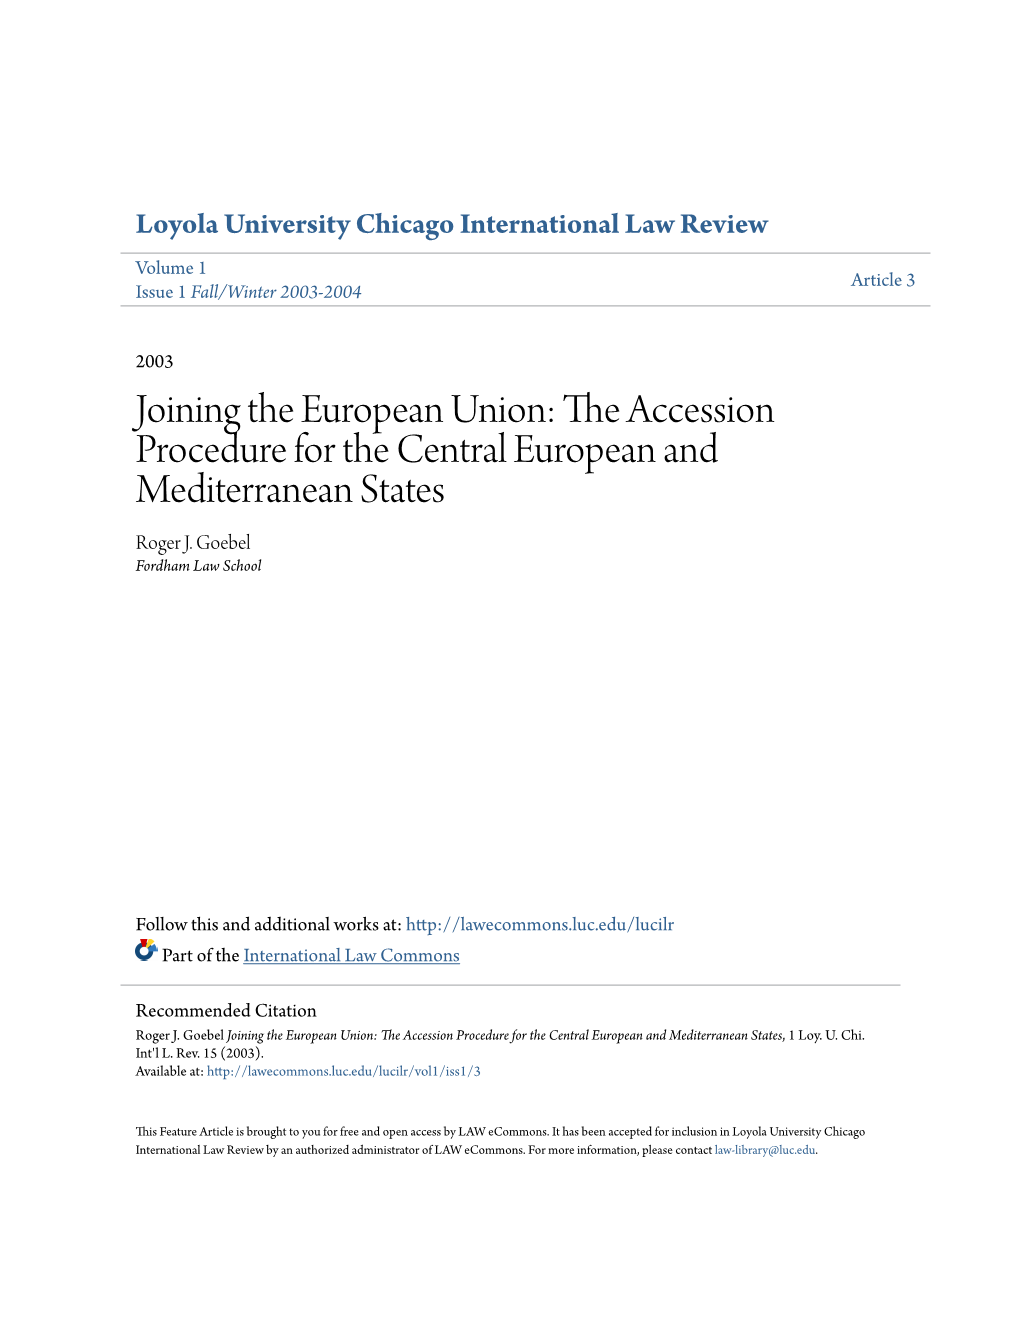 Joining the European Union: the Accession Procedure for the Central European and Mediterranean States Roger J